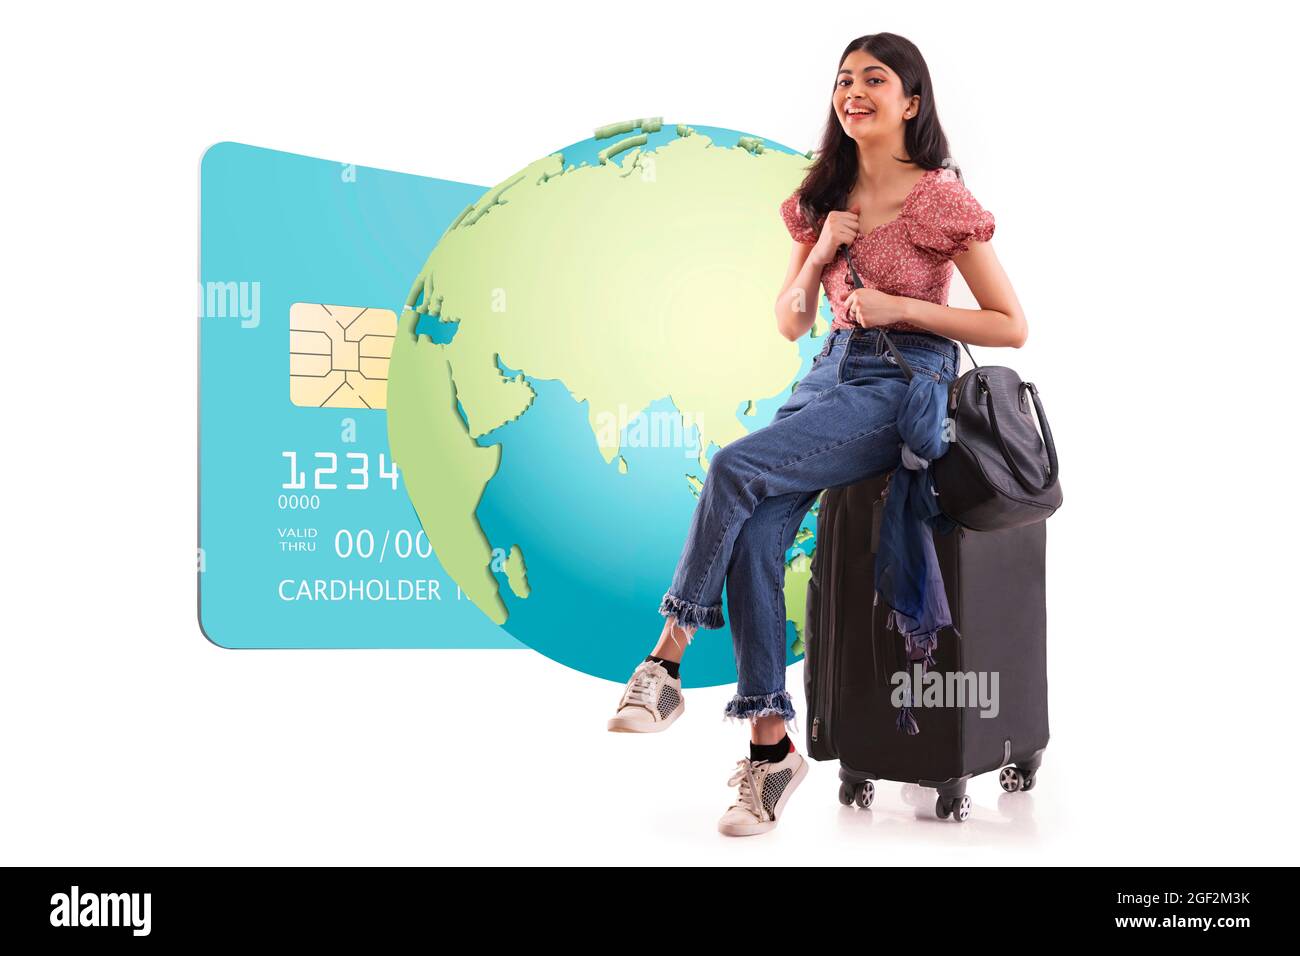 A young woman sitting with her luggage with a graphic of global net-banking. Stock Photo